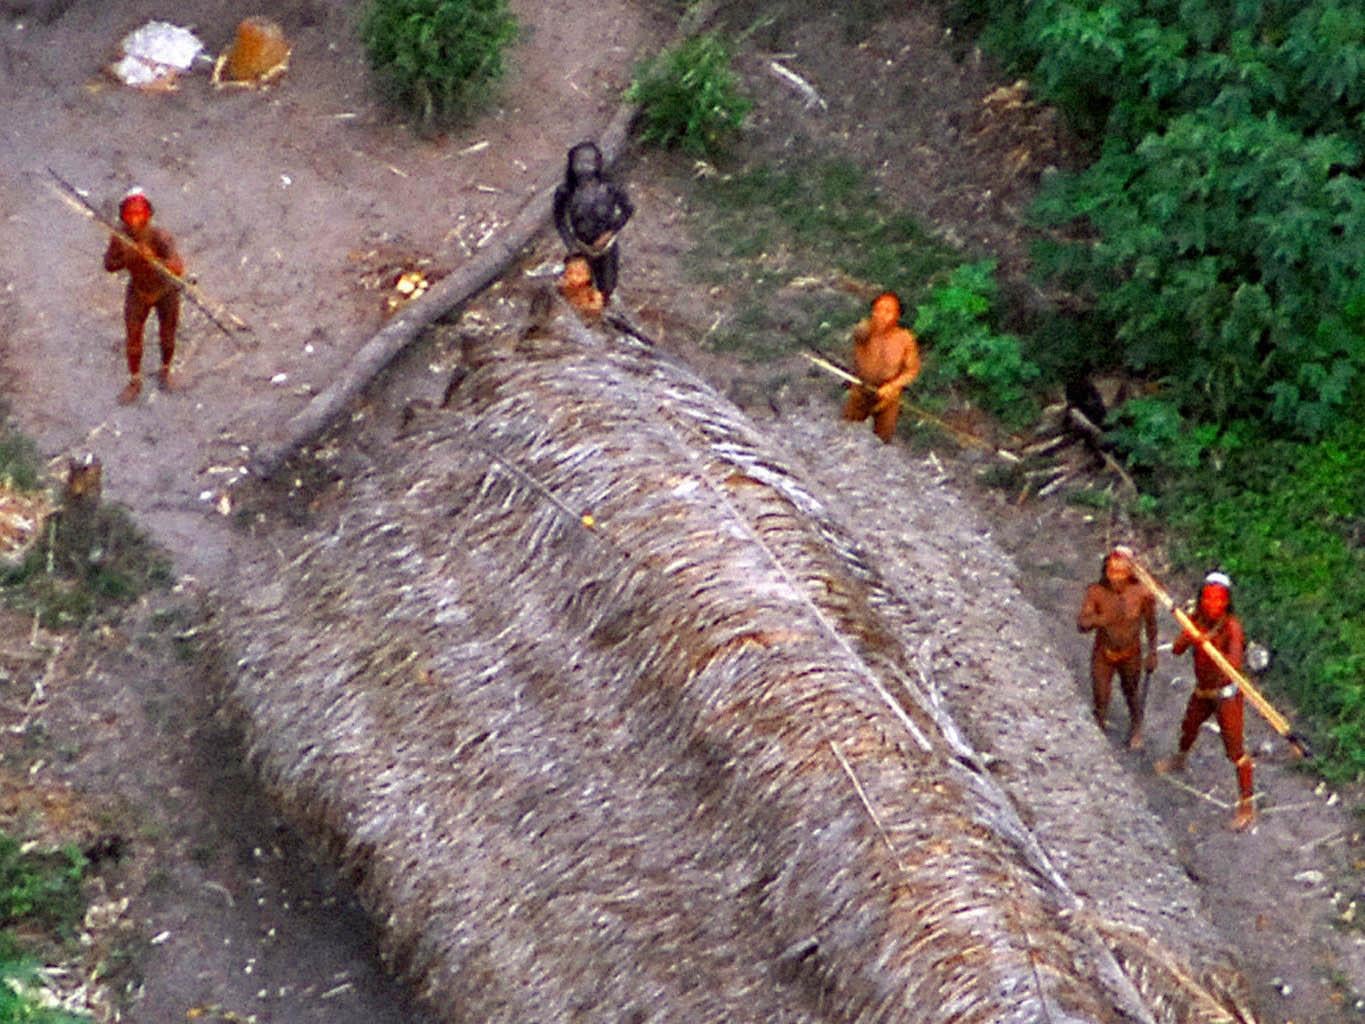 Members of an uncontacted tribe in Brazil, in a photograph taken in 2008